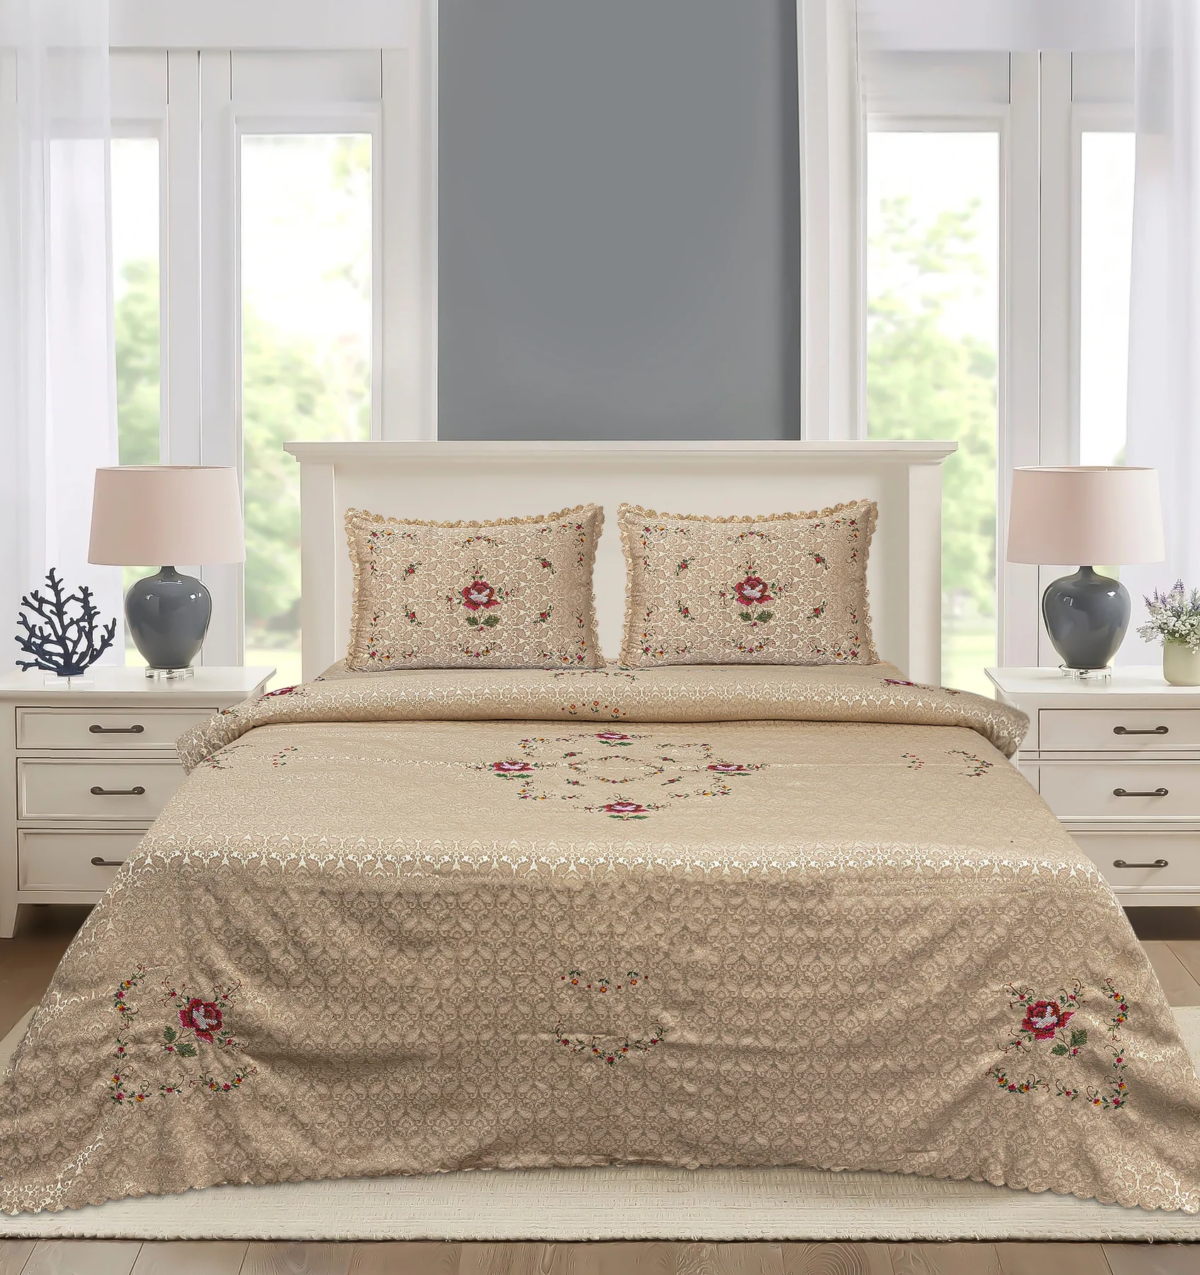 What are the Different Types of Comforter Sets Available?